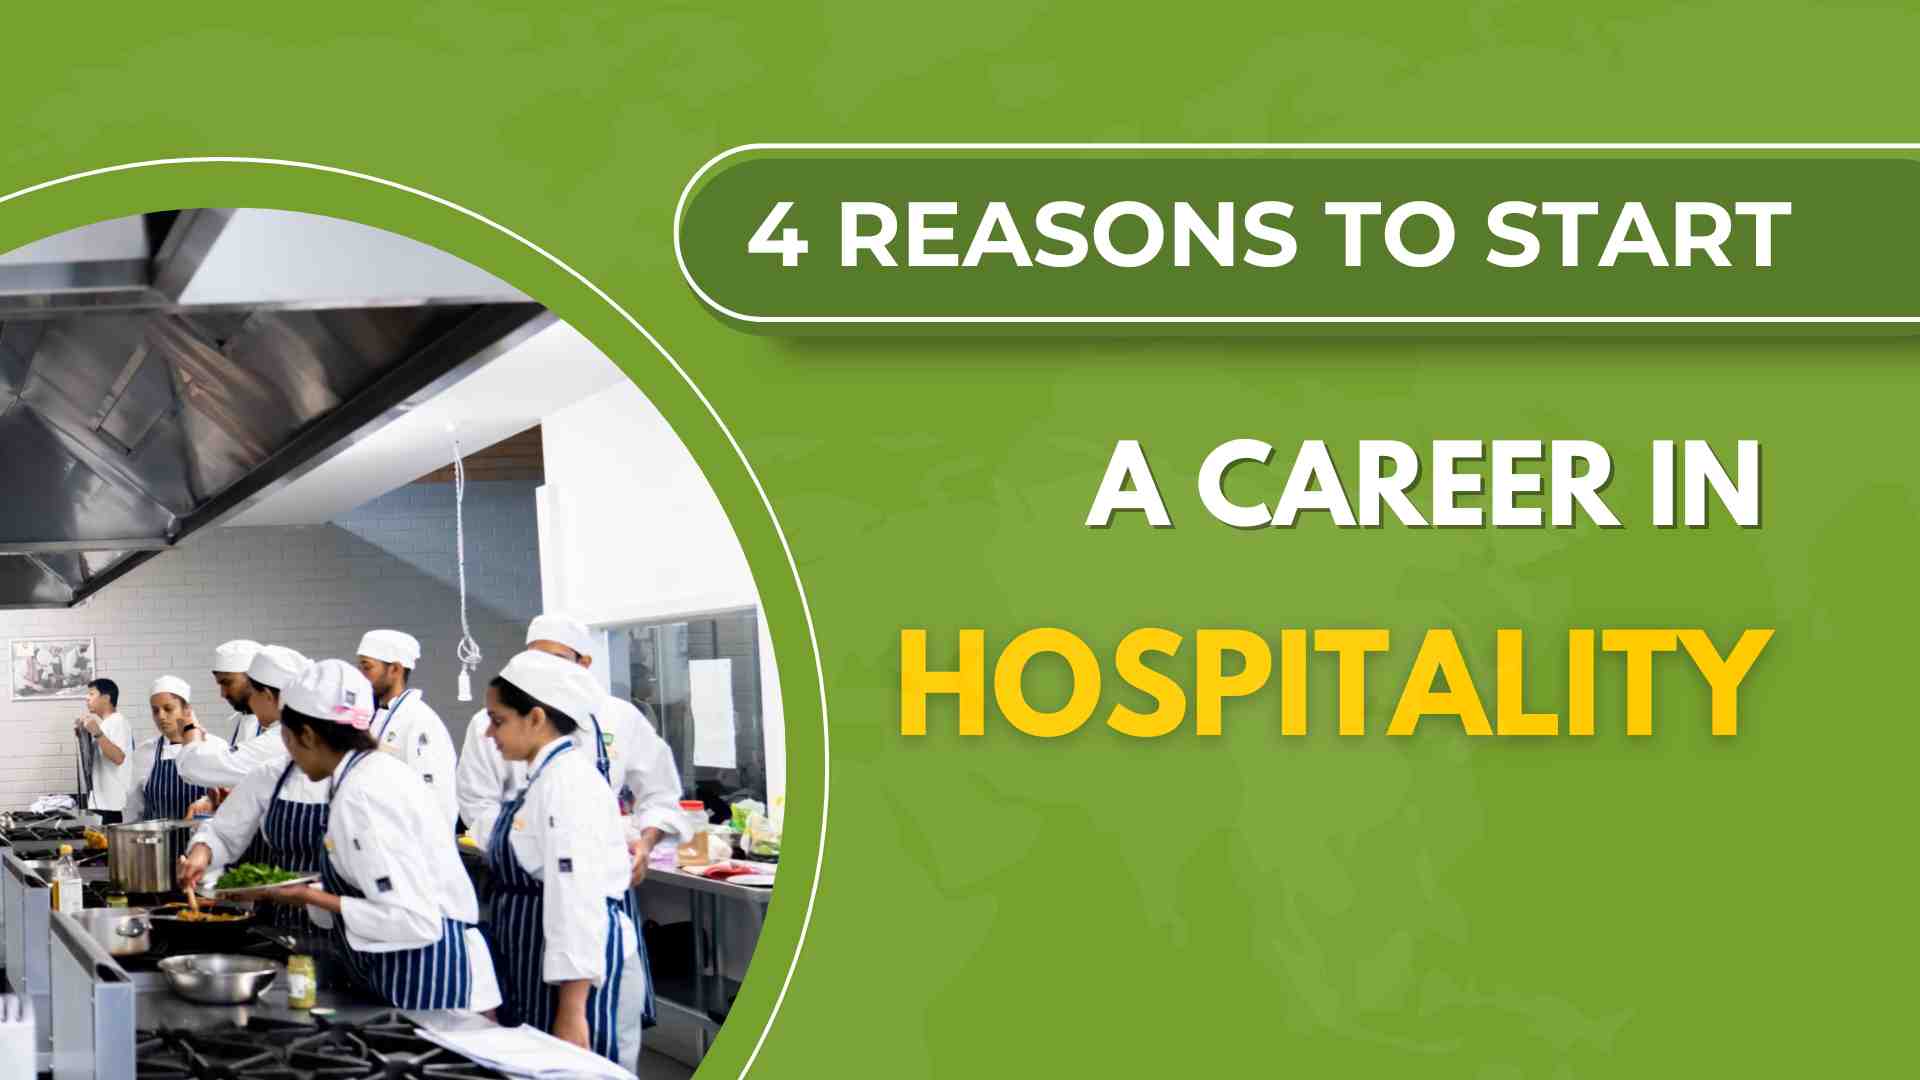 Reasons to start career in hospitality